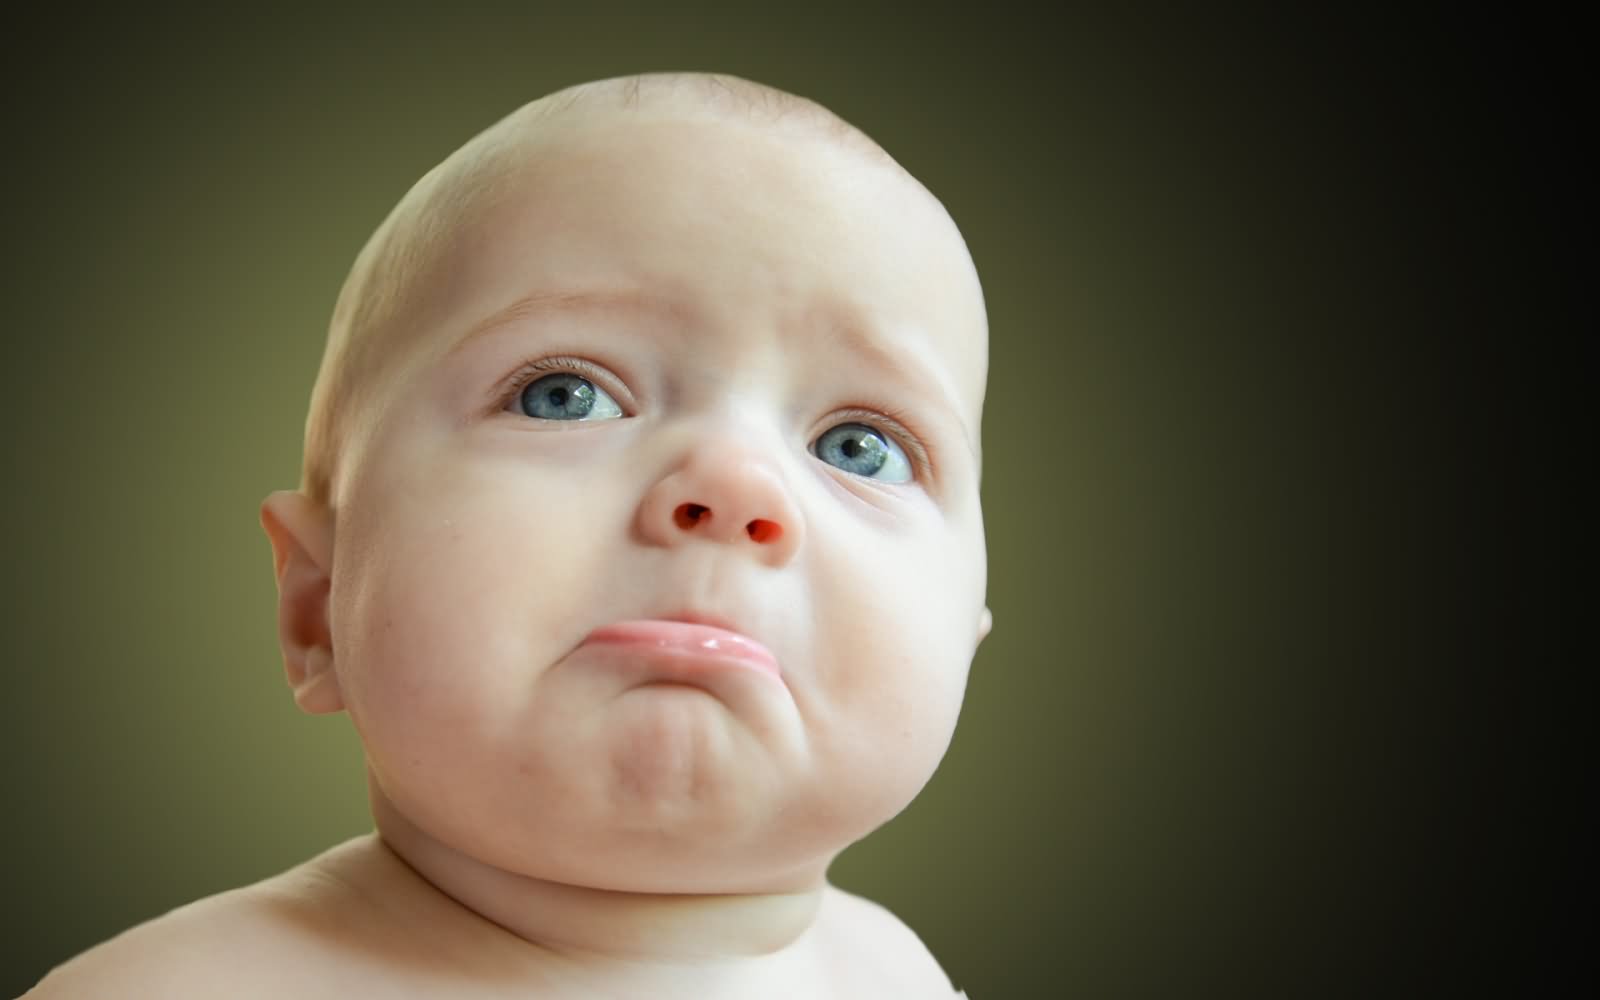 Sweet Baby Very Funny Sad Face Picture For Whatsapp